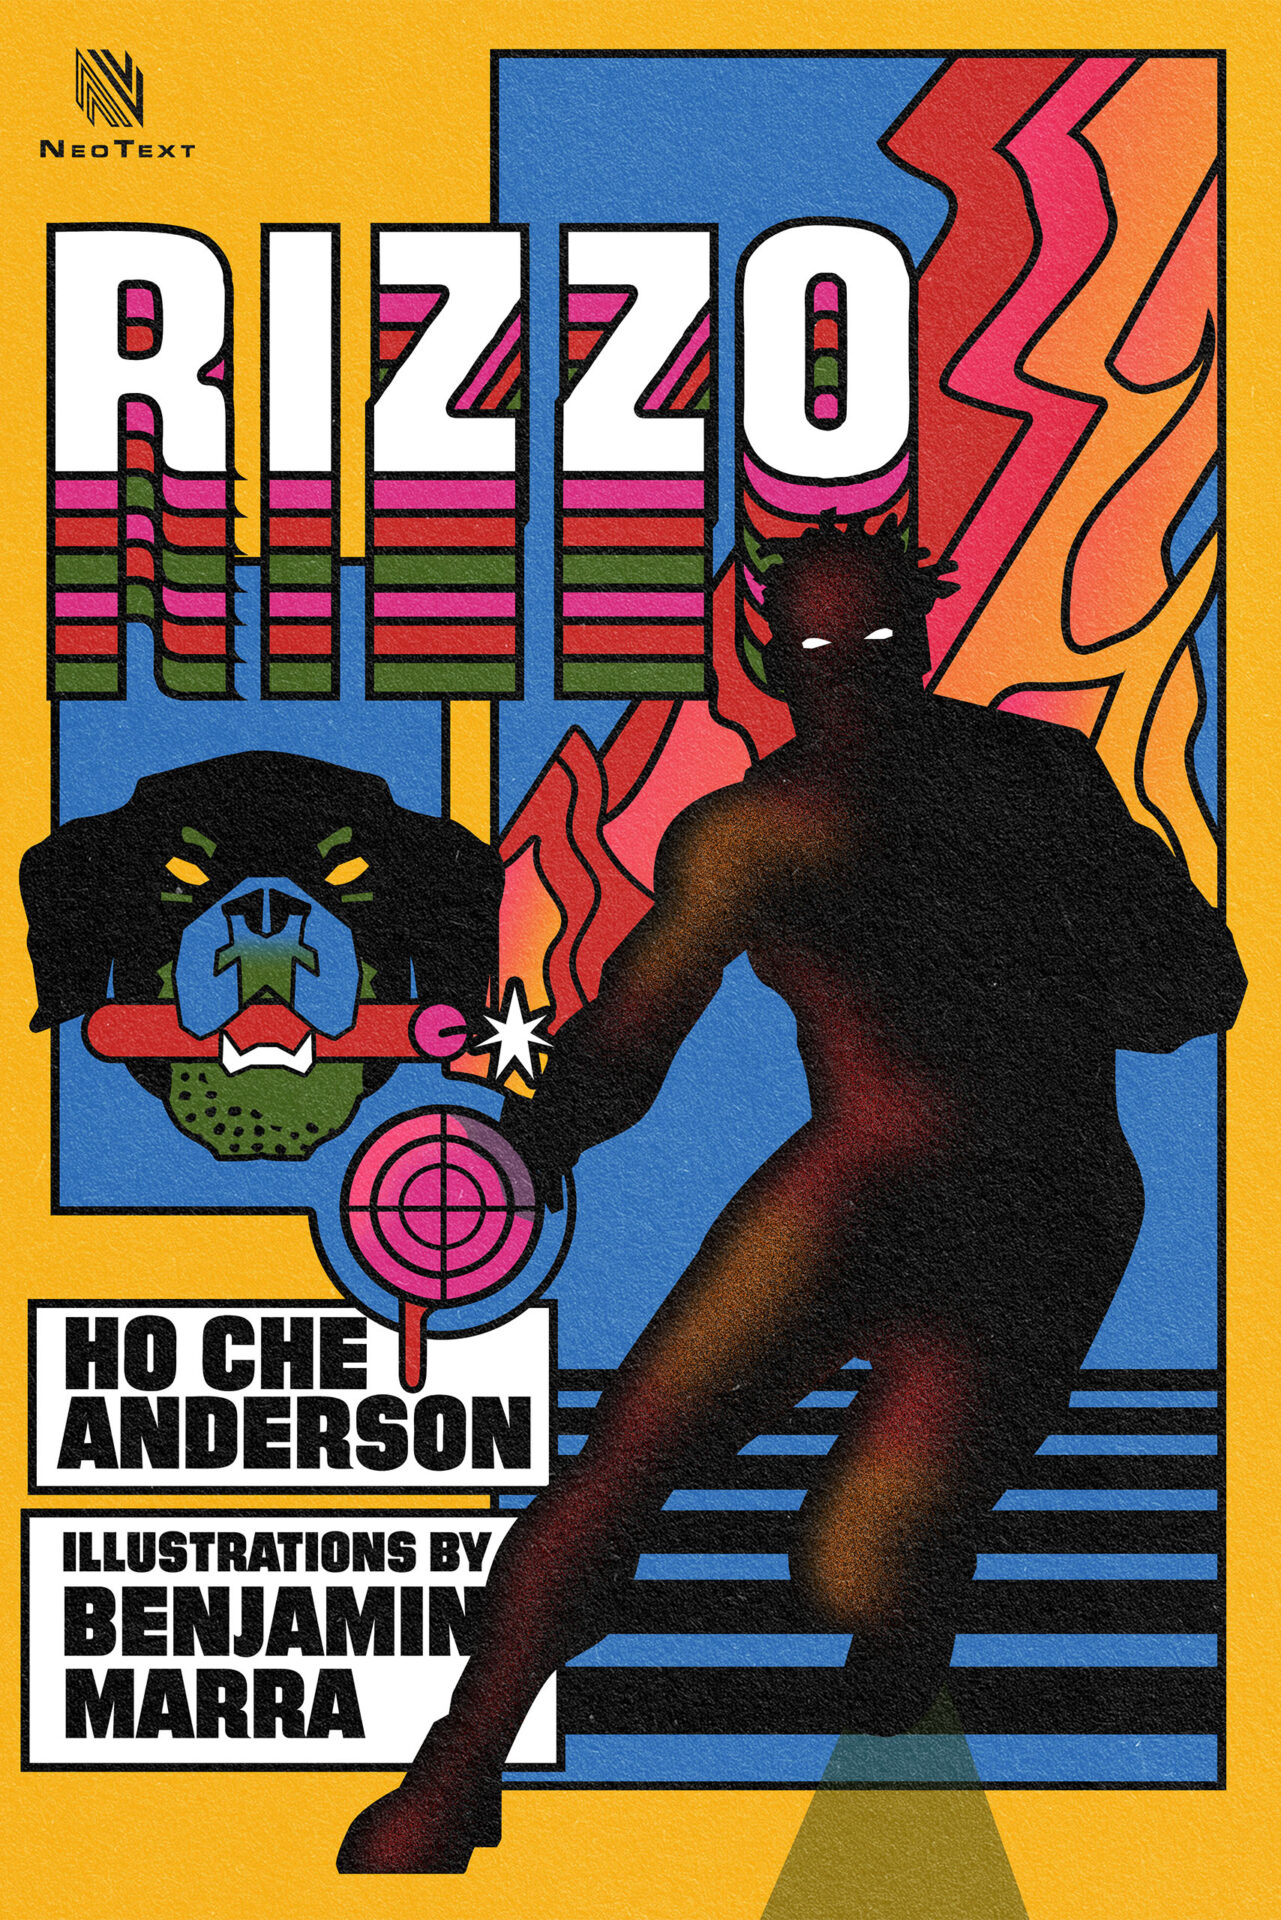 https://neotextcorp.com/wp-content/uploads/2020/10/Rizzo_cover_WBYK.jpg